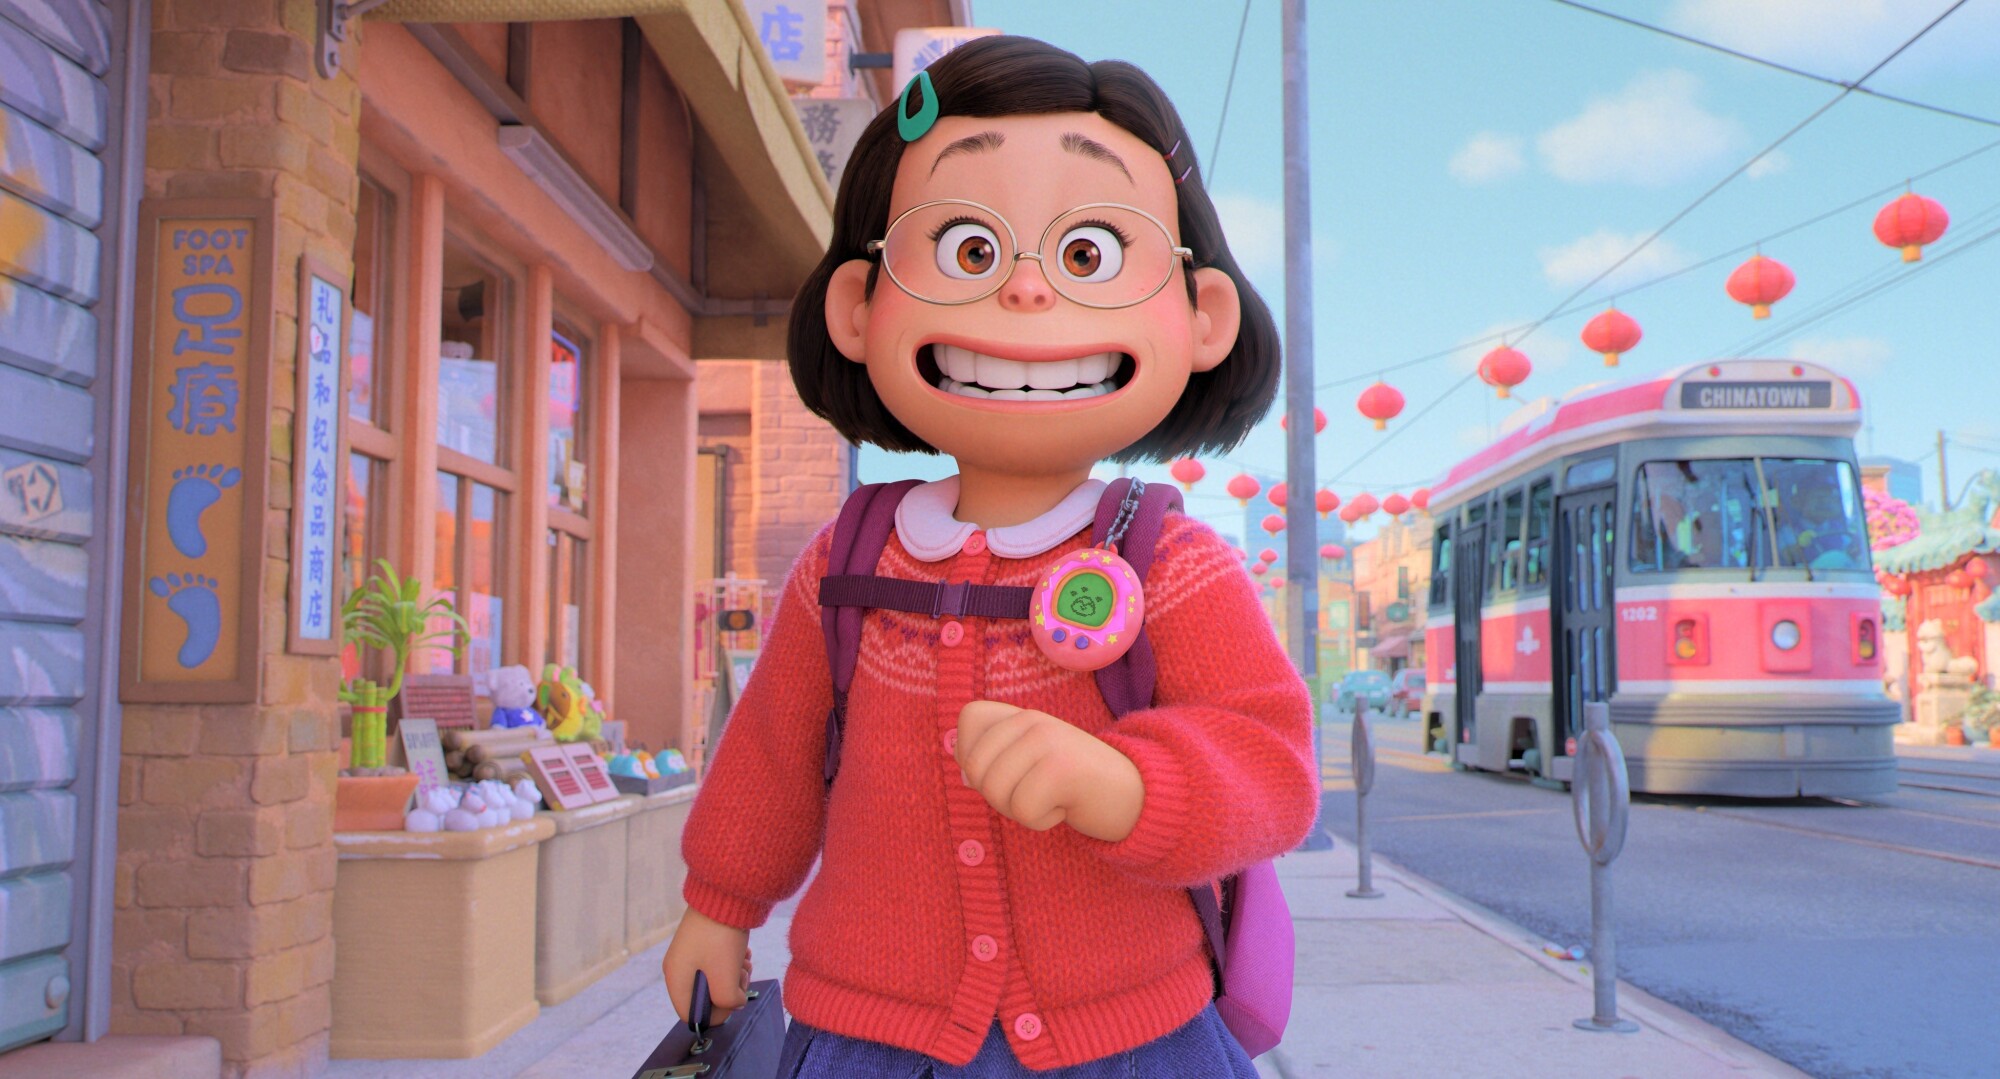 Meilin, voiced by Rosalie Chiang, in a scene from the Pixar movie 